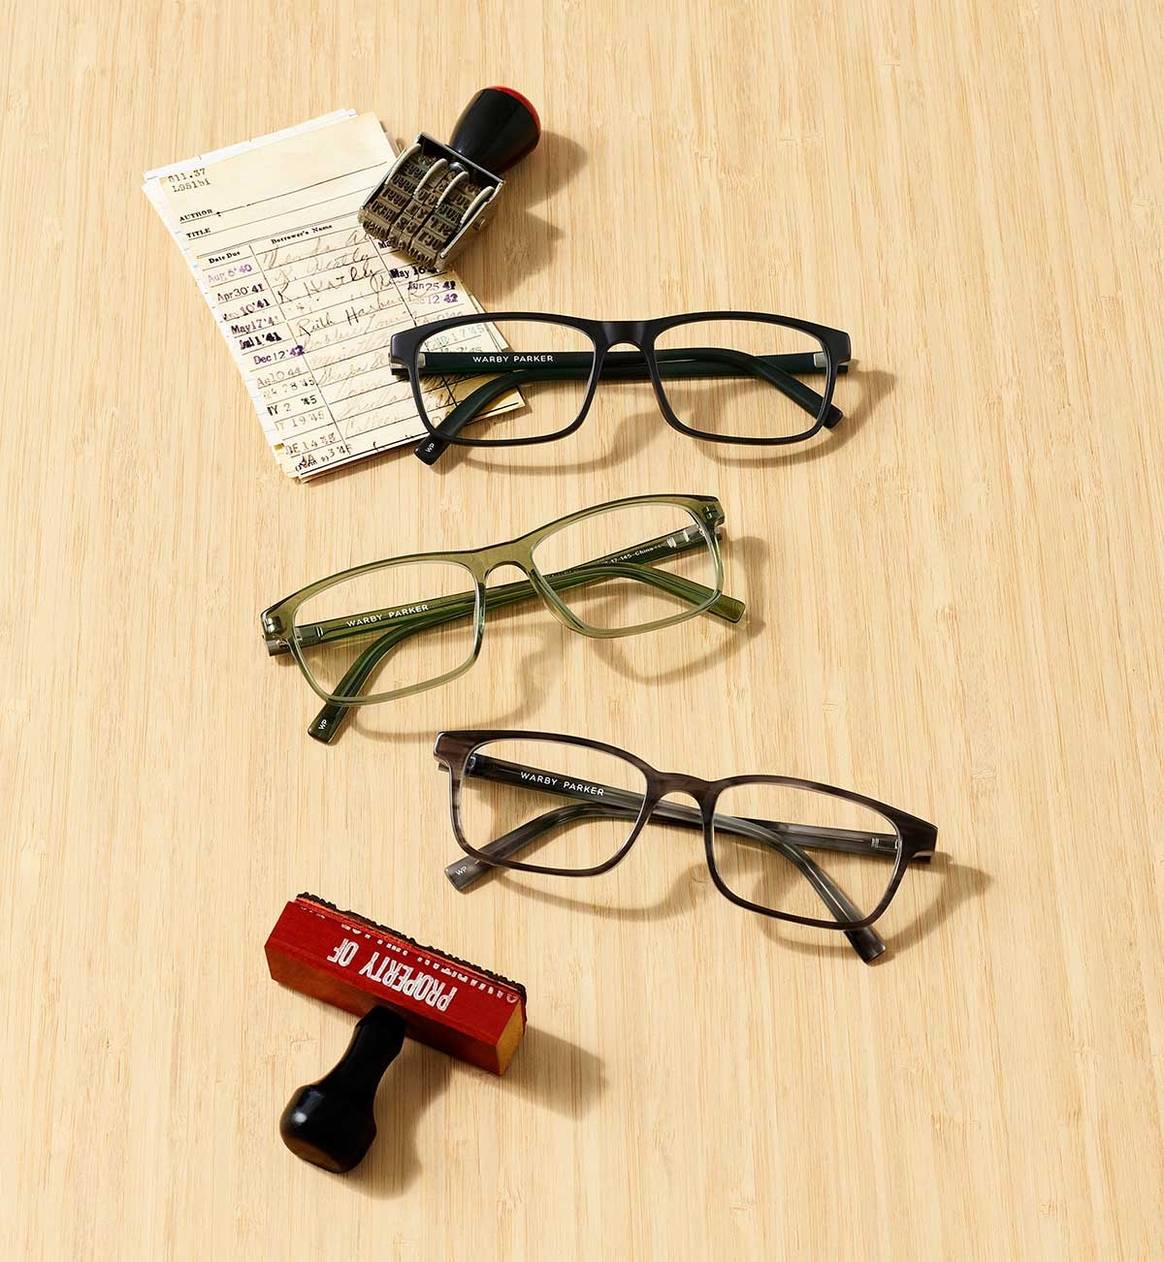 Warby Parker teams up with New York Public Library for Fall collection